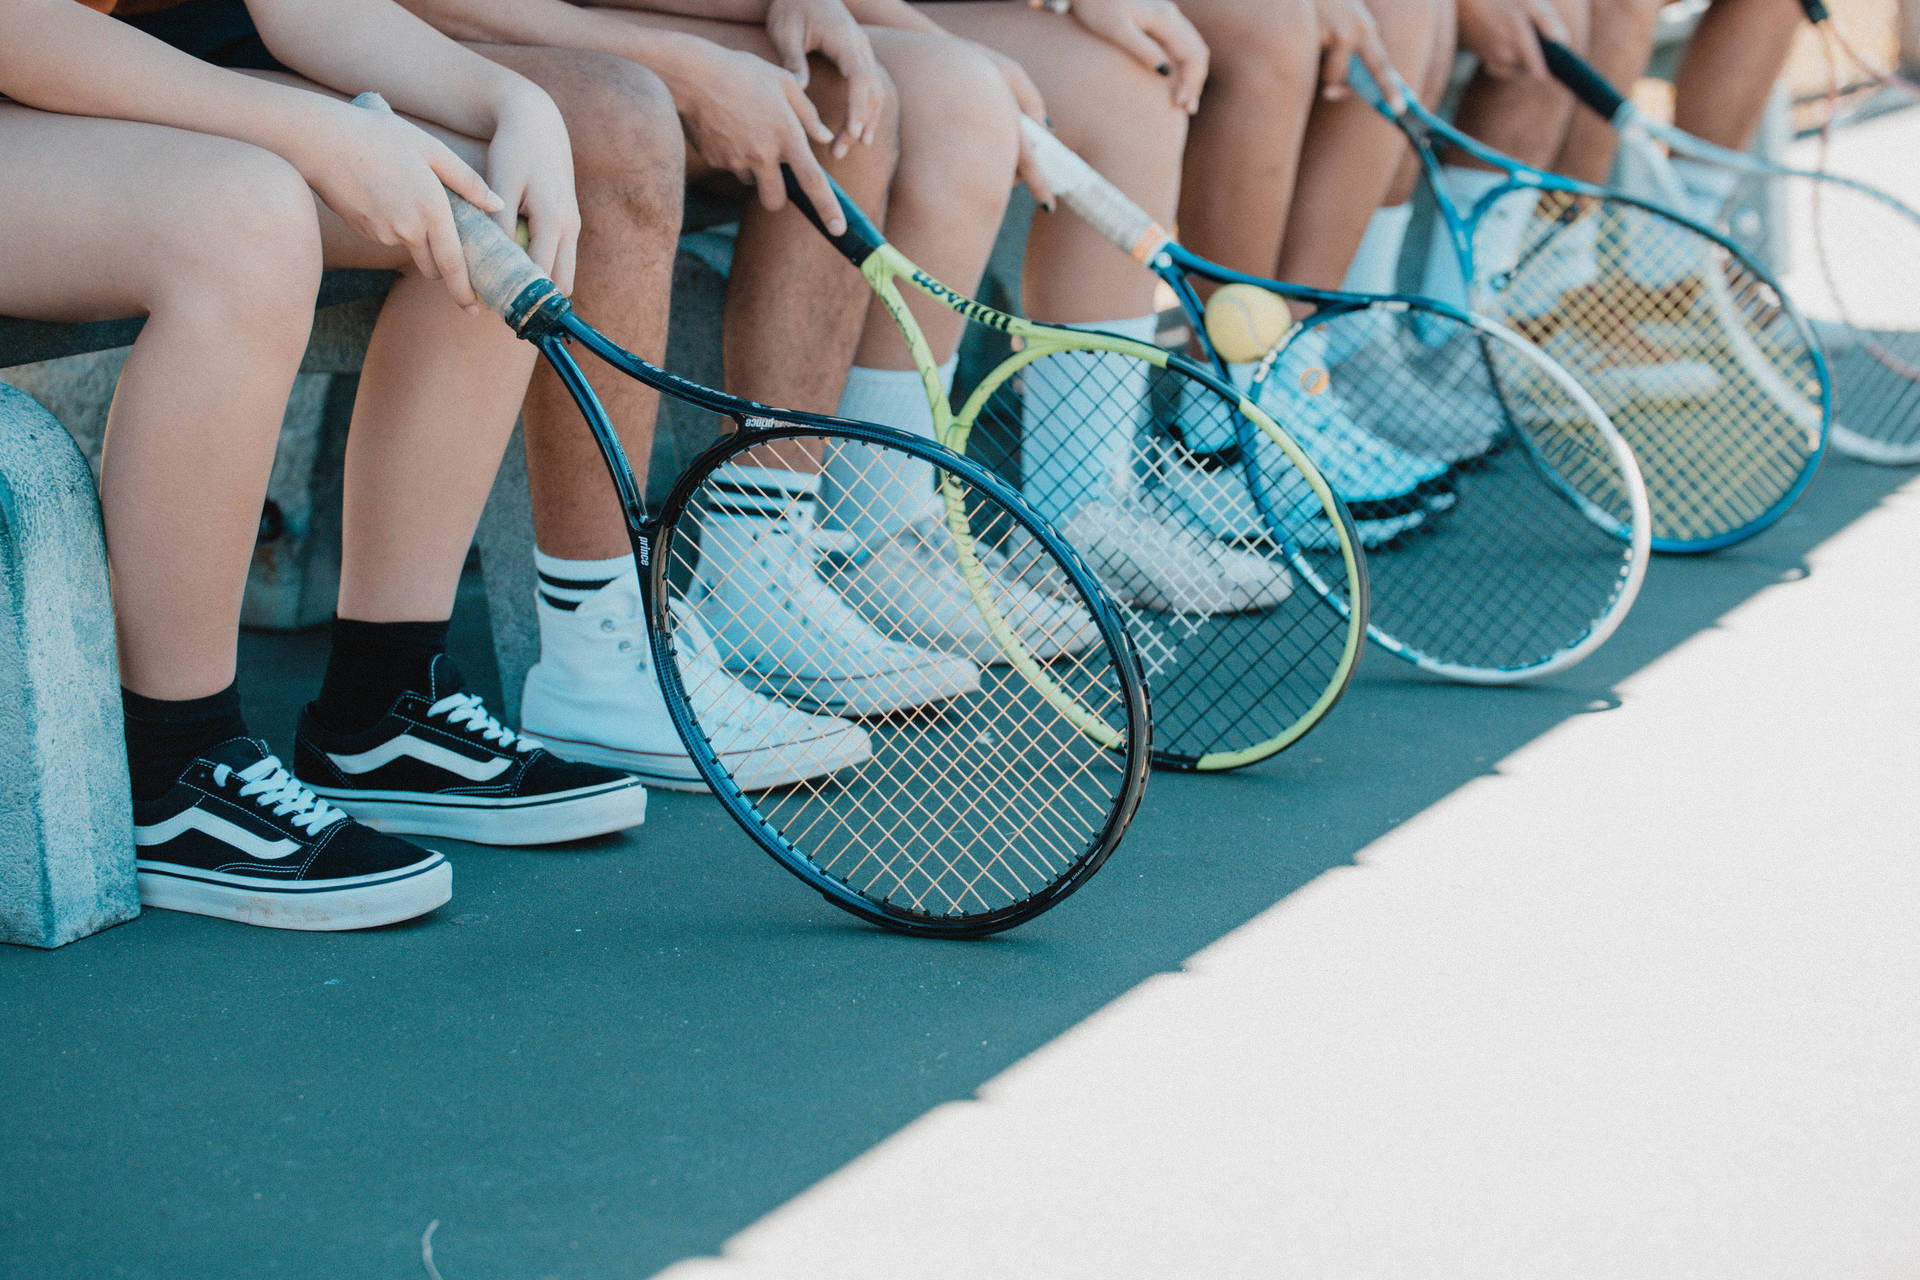 Tennis 4898X3265 Wallpaper and Background Image